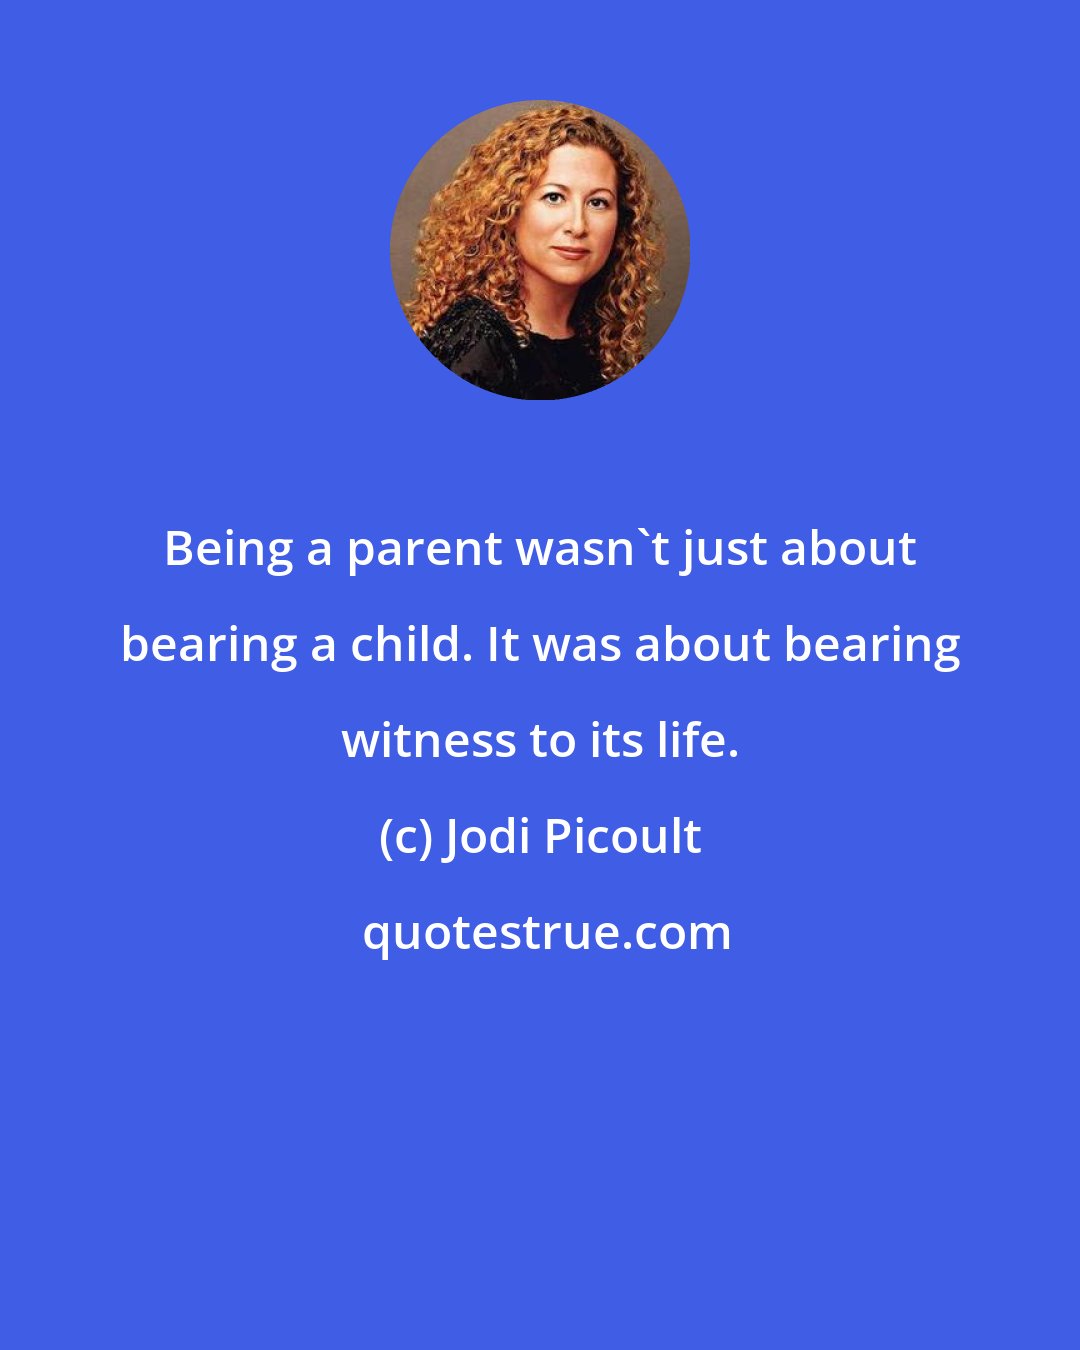 Jodi Picoult: Being a parent wasn't just about bearing a child. It was about bearing witness to its life.